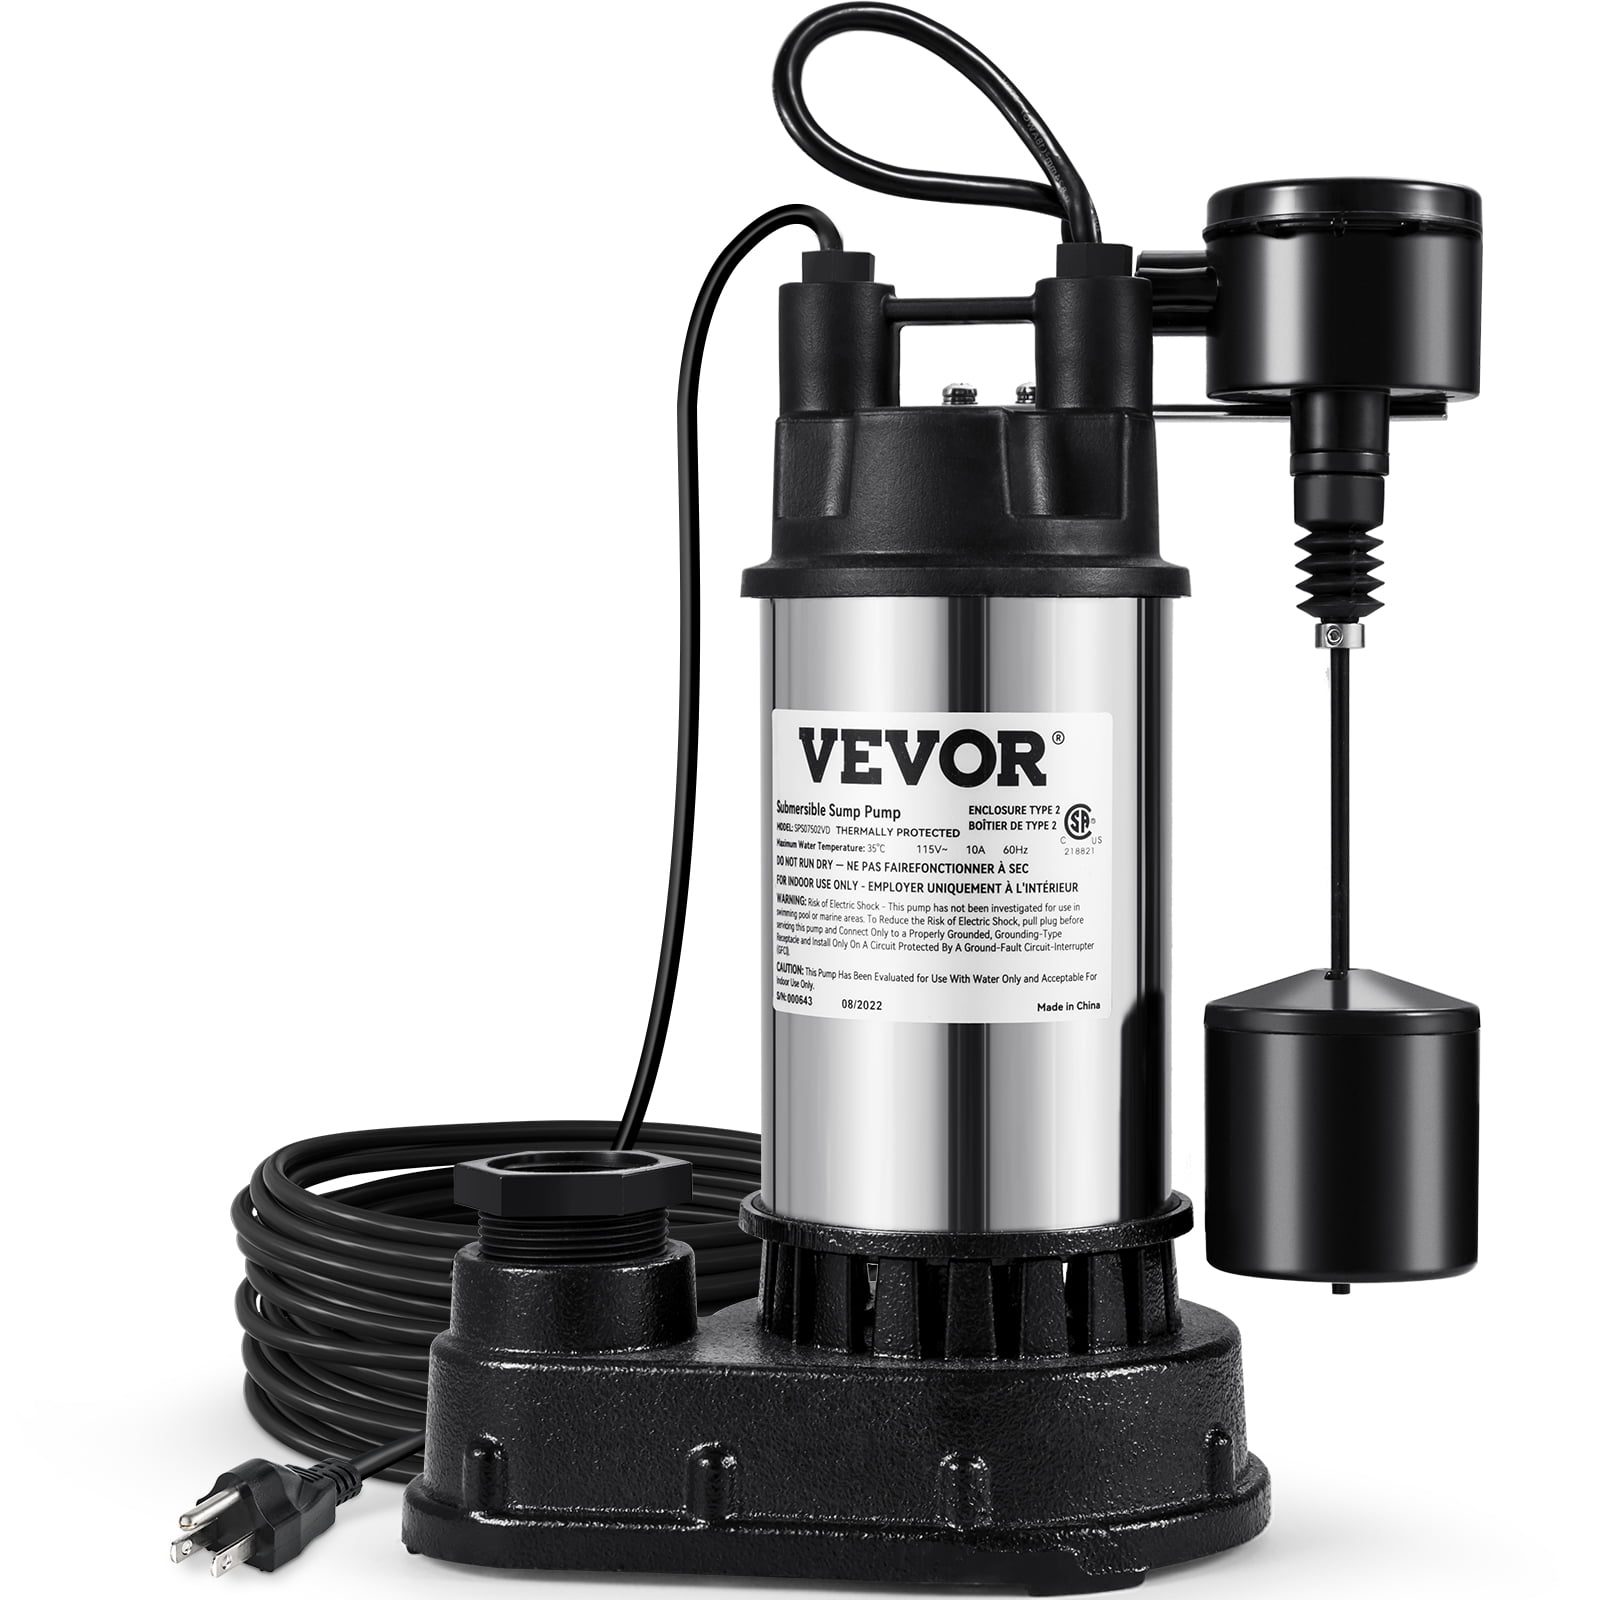 VEVOR Sump Pump, 1.5 HP 6000 GPH, Submersible Cast Iron and Stainless Steel  Water Pump, 1-1/2 Discharge With 1-1/4 Adaptor, Automatic Vertical Float  Switch, for Indoor Basement Water Basin 